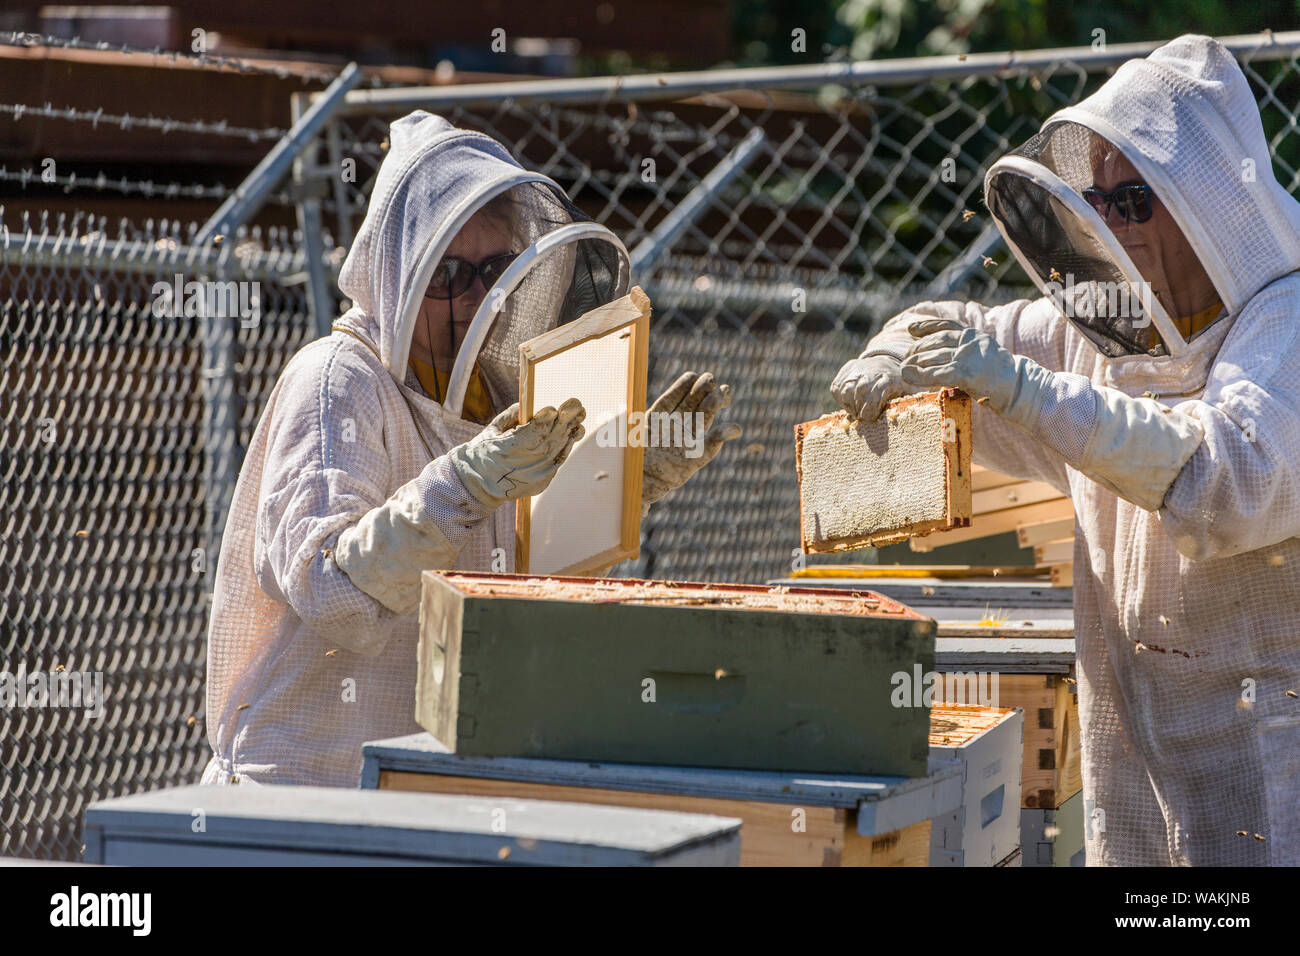 Maple Valley, Washington State, USA. Female beekeepers exchanging an empty frame for a fully capped frame in a honey super. (Editorial Use Only) Stock Photo